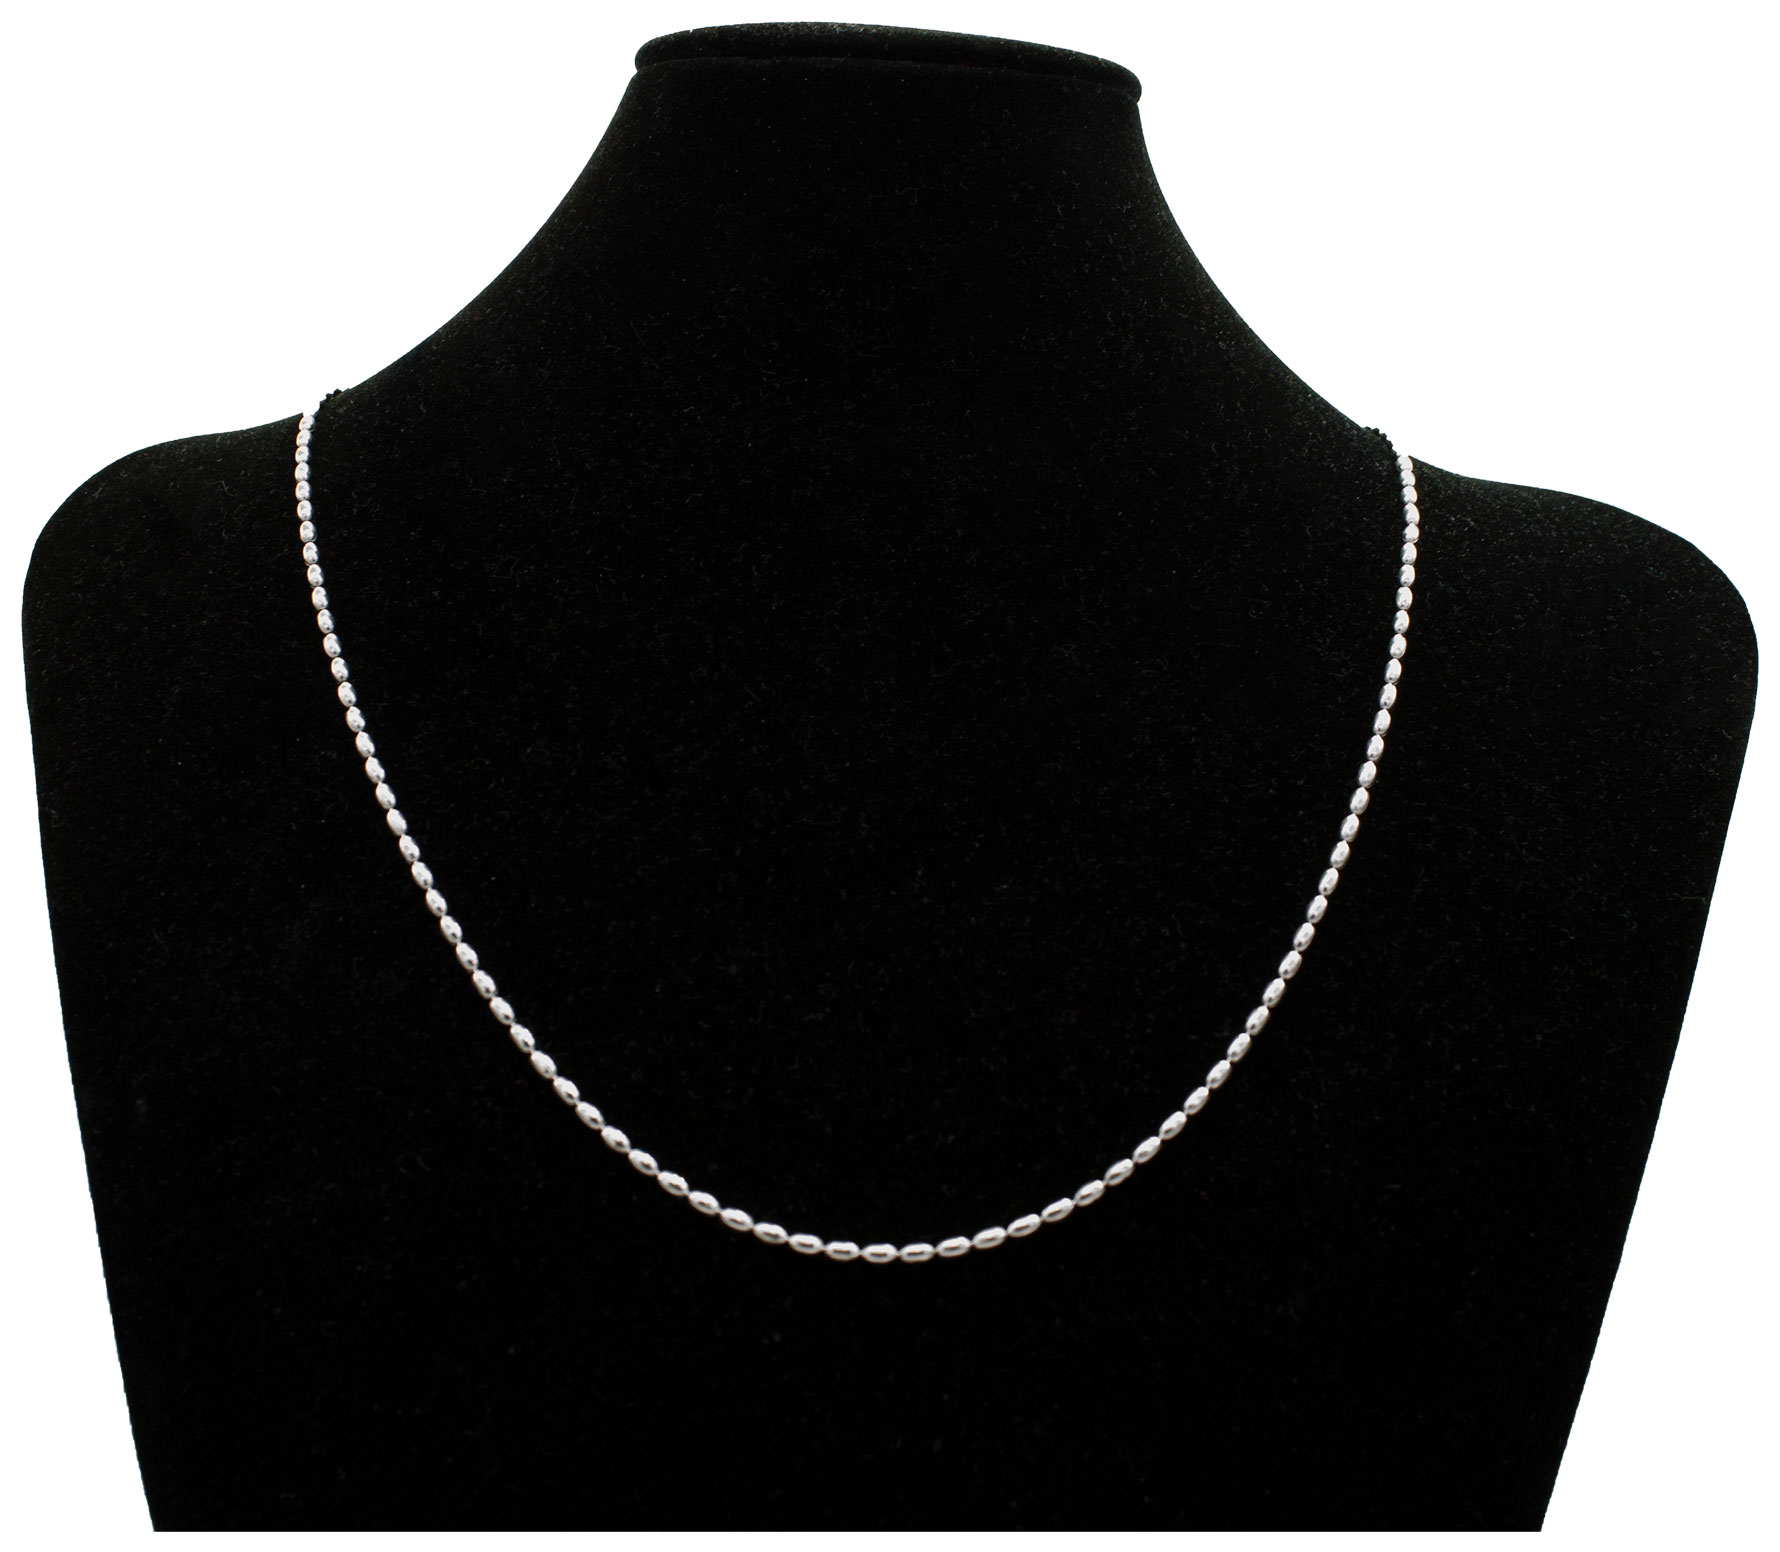 Rice Bead Thin Chain Sterling Silver Necklace